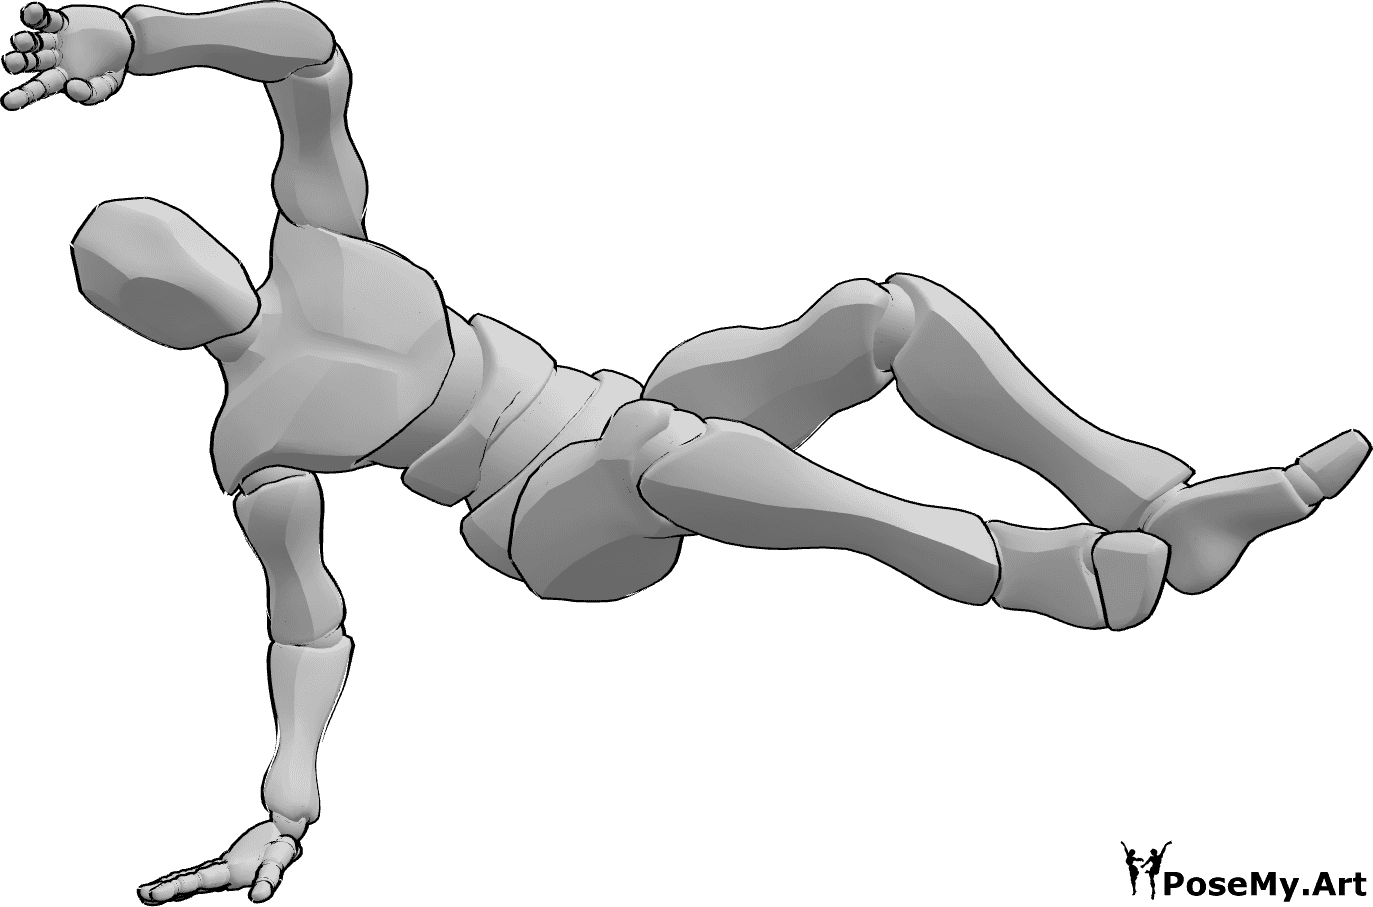 Pose Reference- Right handstand leg pose - Male is breakdancing on the floor, both legs are in the air, standing on right hand